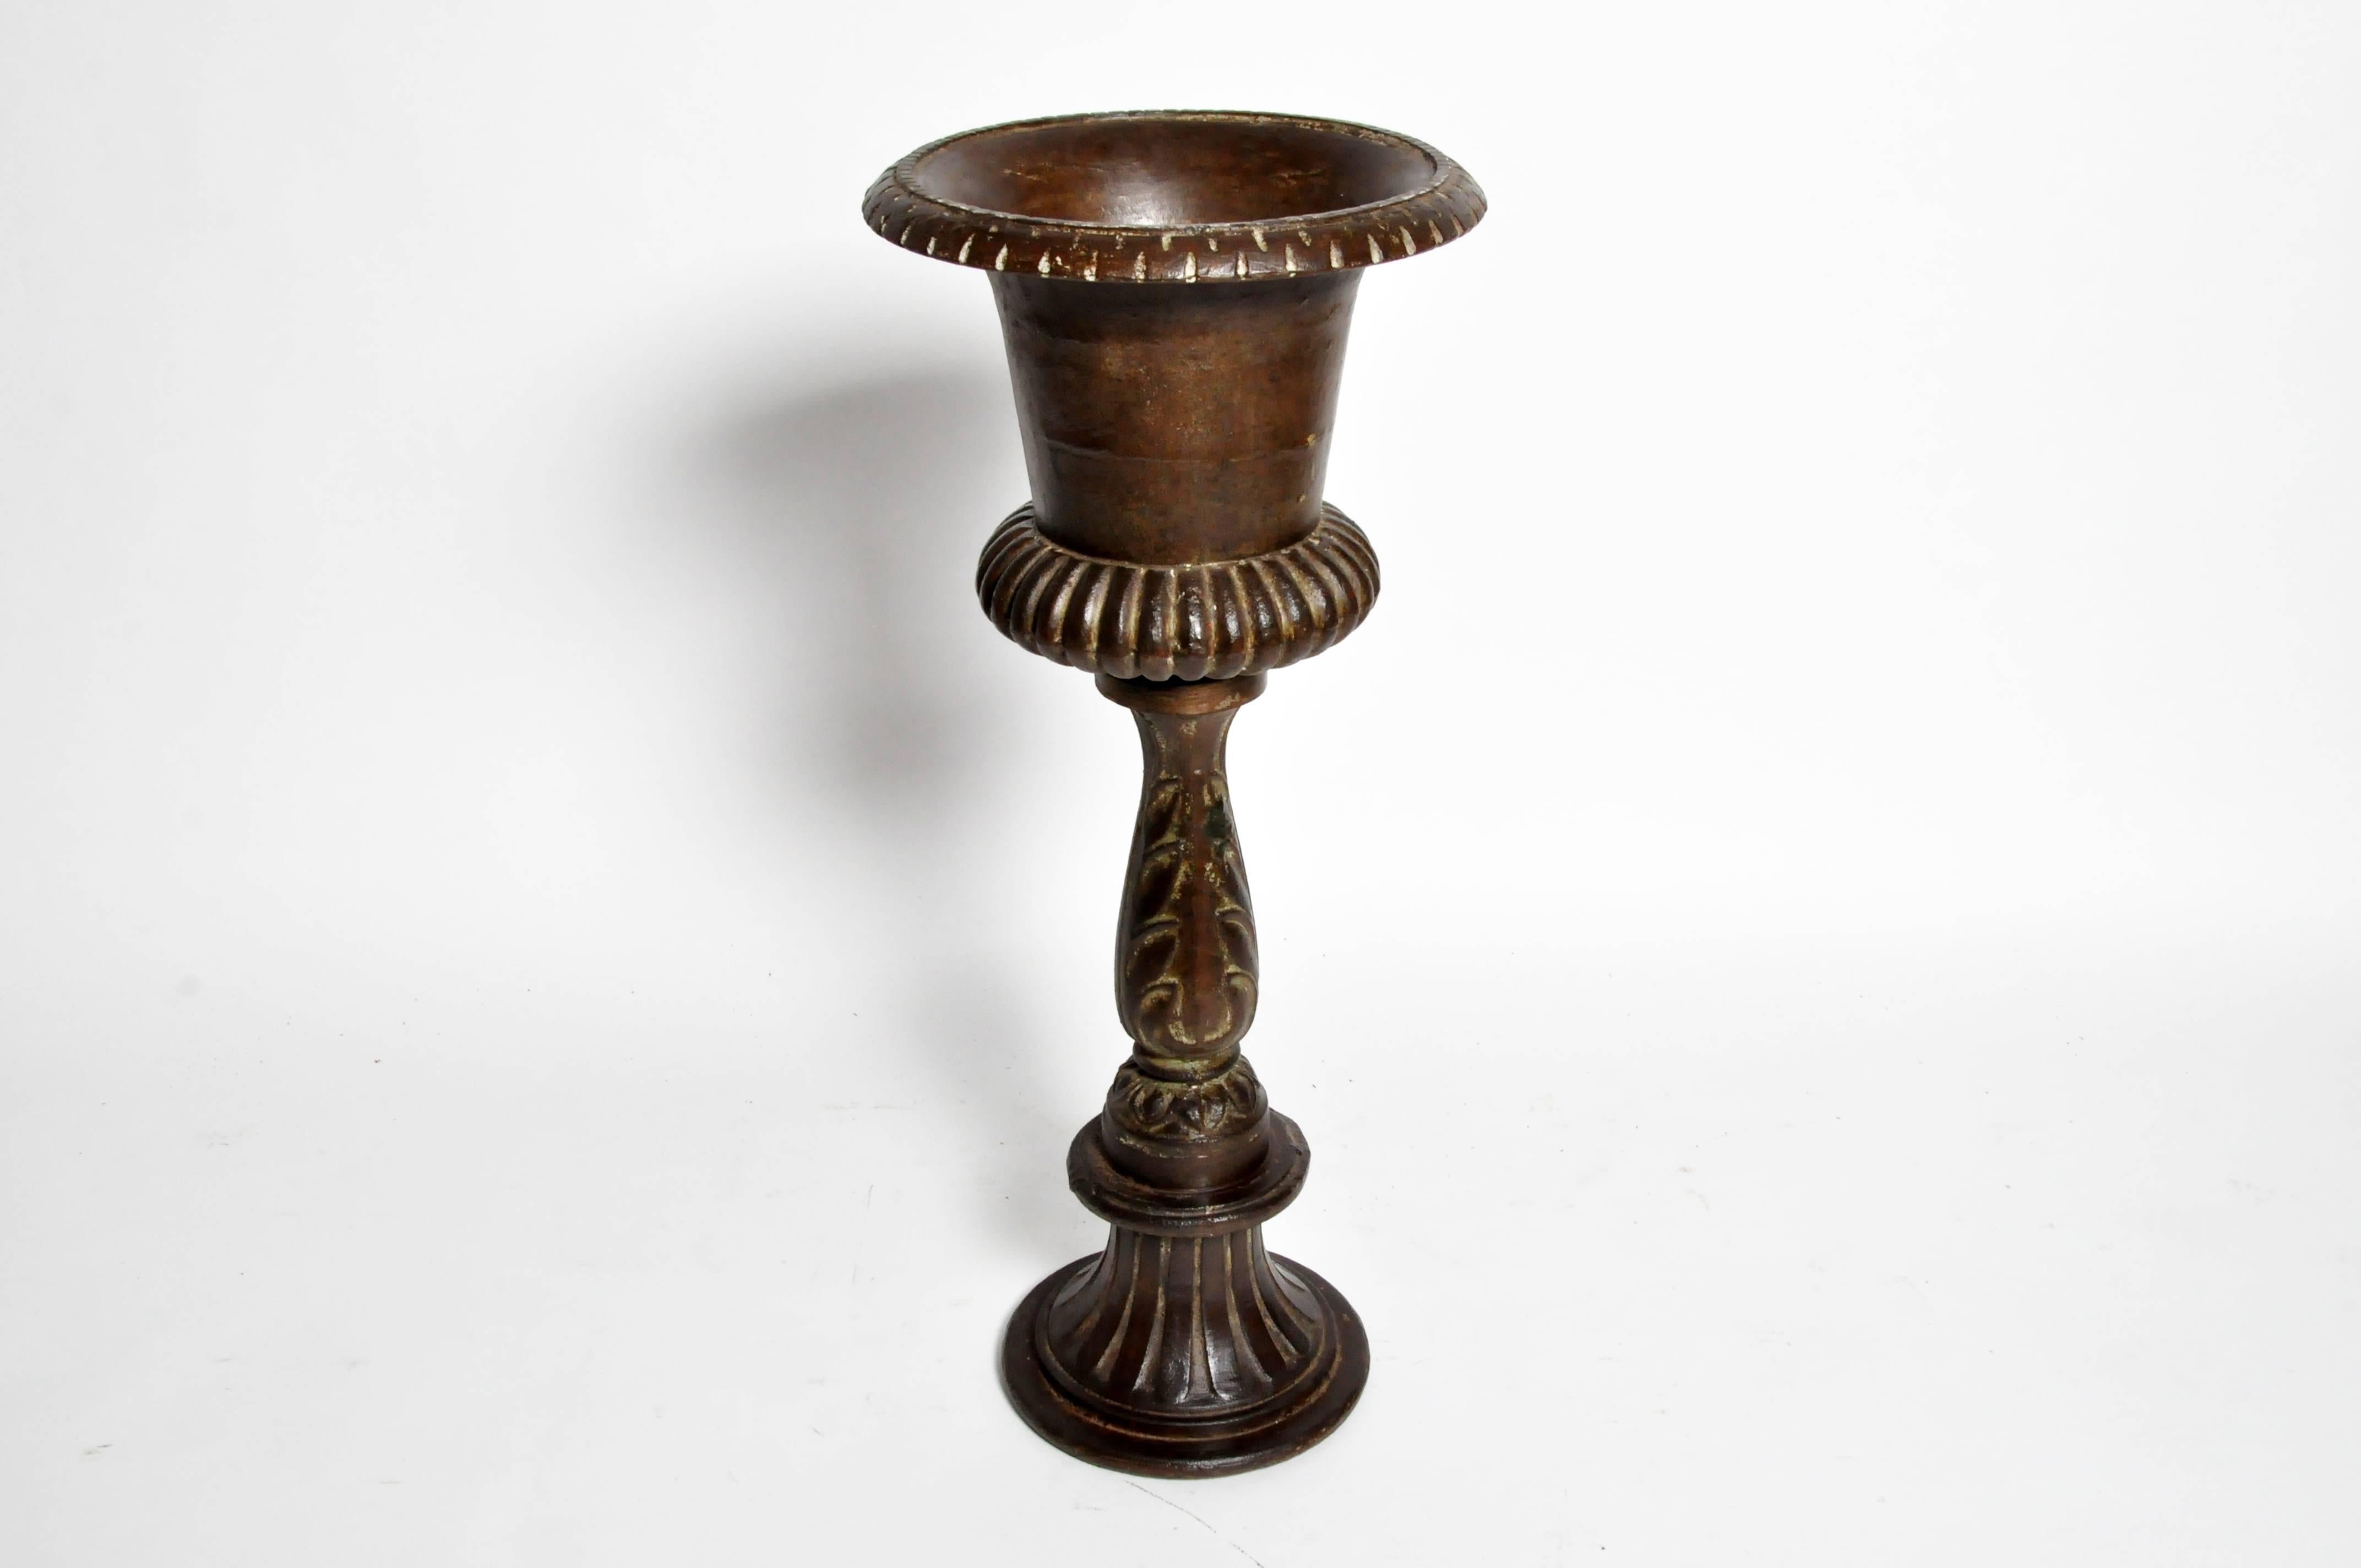 This cast iron flower pot is from Gujarat, India. Made in the mid-20th century the iron flower pot was made in the 19th century style.